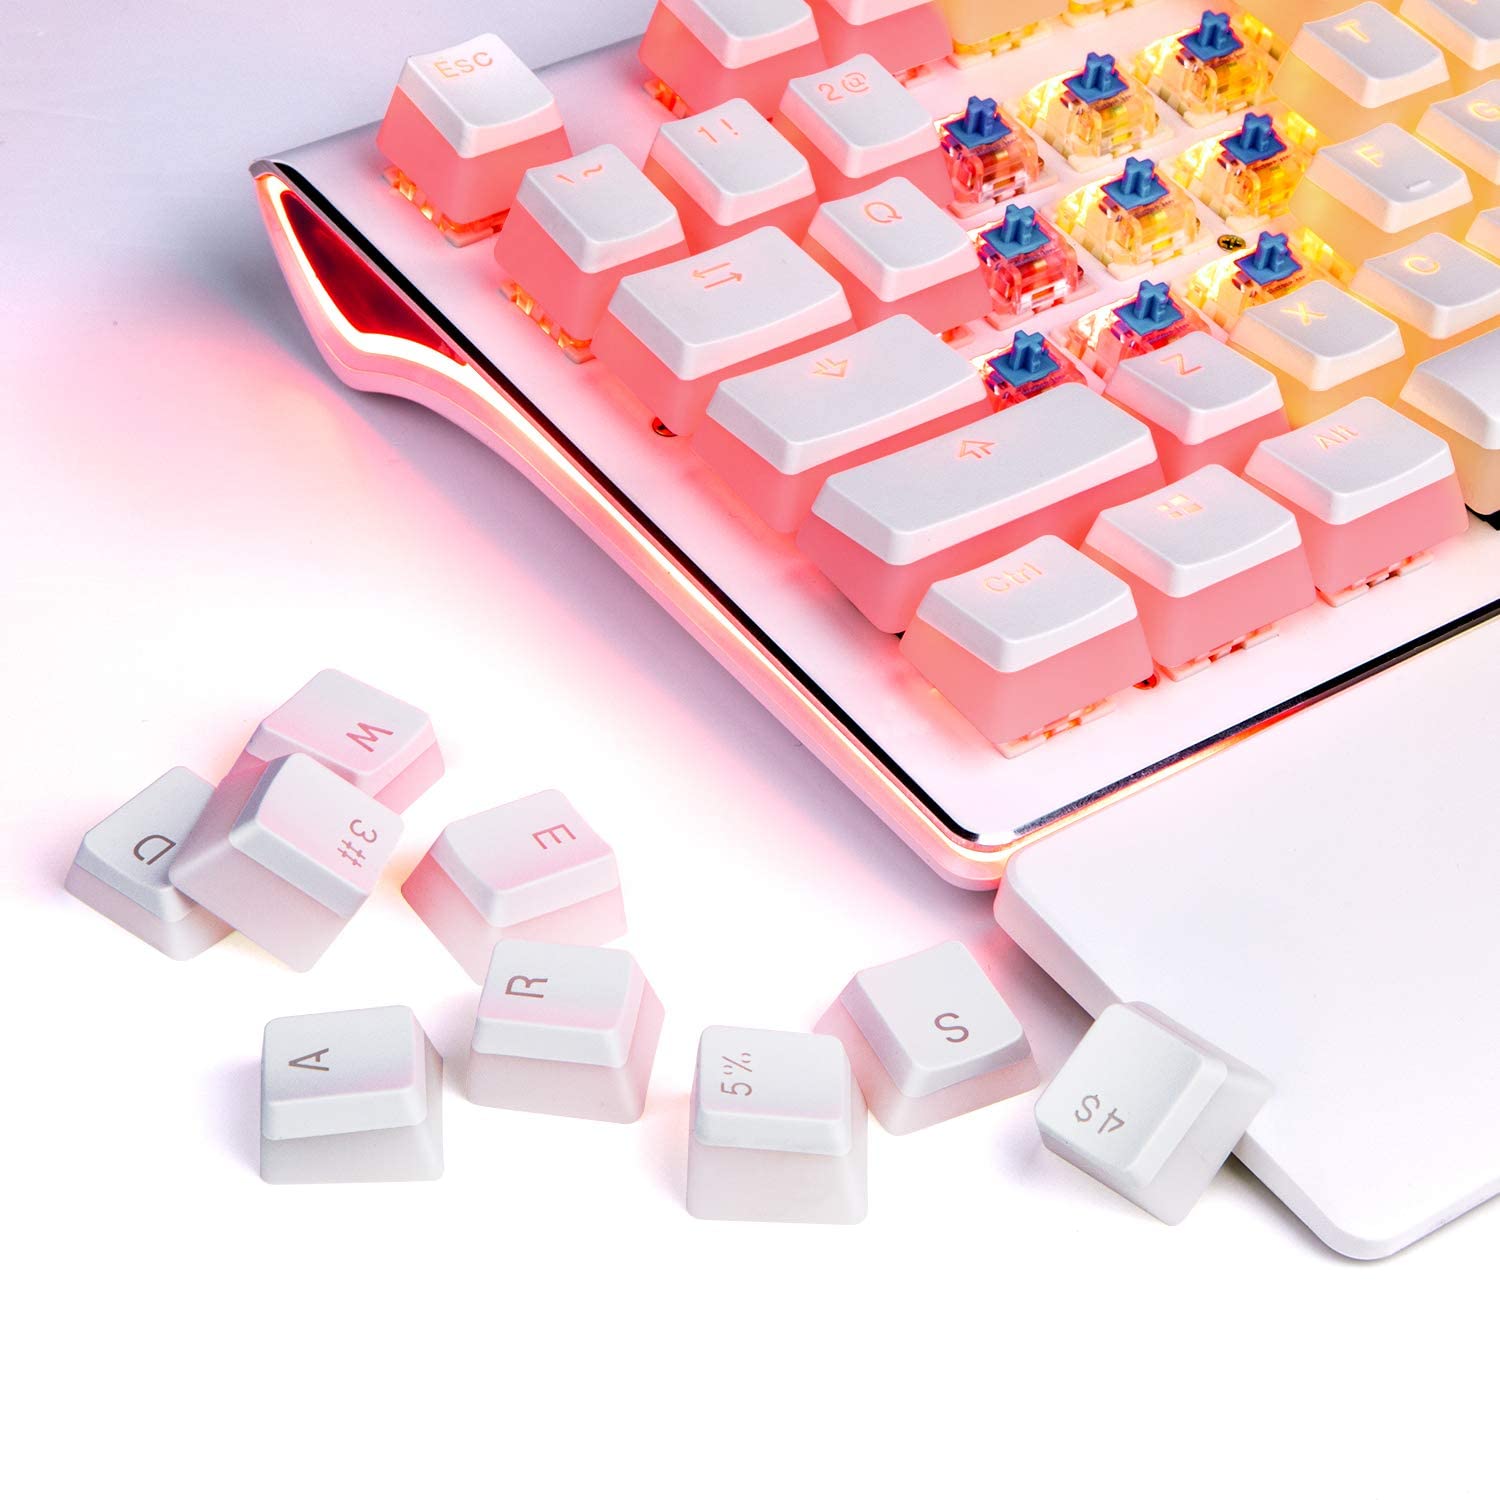 HAVIT KC22 PBT Keycaps with Puller - Pudding, Double Shot, for Cherry MX / Outemu Mechanical Keyboards